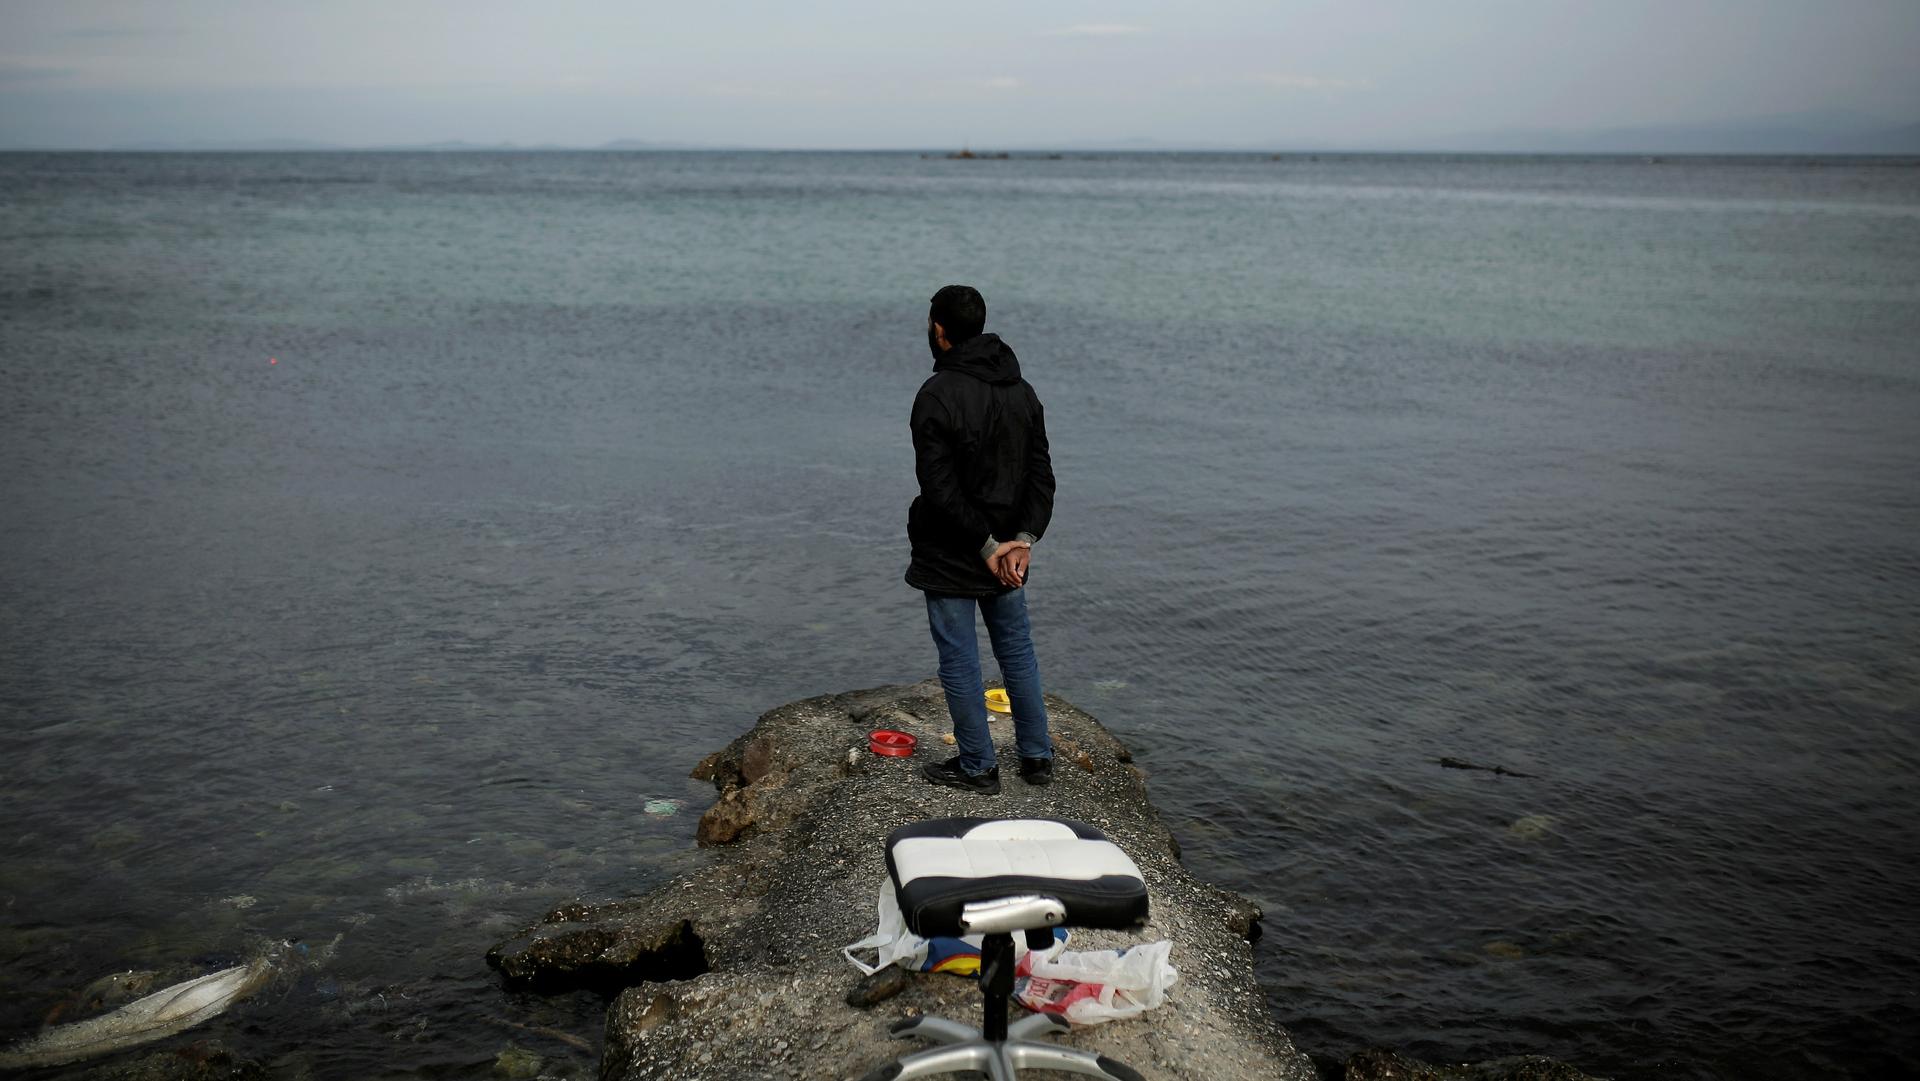 Syrian refugee Muhammad, 42, looks at the sea while fishing in the city of Mytilene, on the island of Lesbos, Greece, Dec. 2, 2017.  